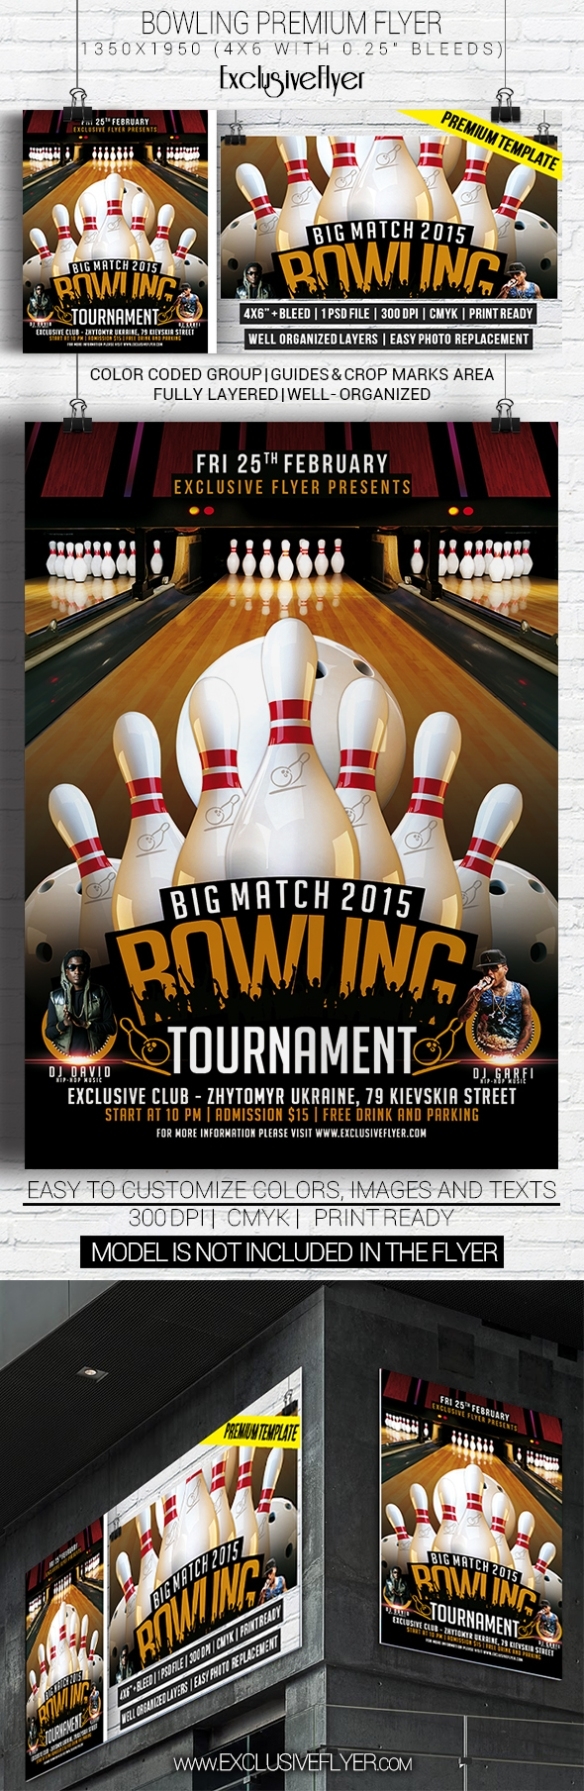 Bowling Tournament - Premium Flyer Template On Behance Within Bowling Party Flyer Template